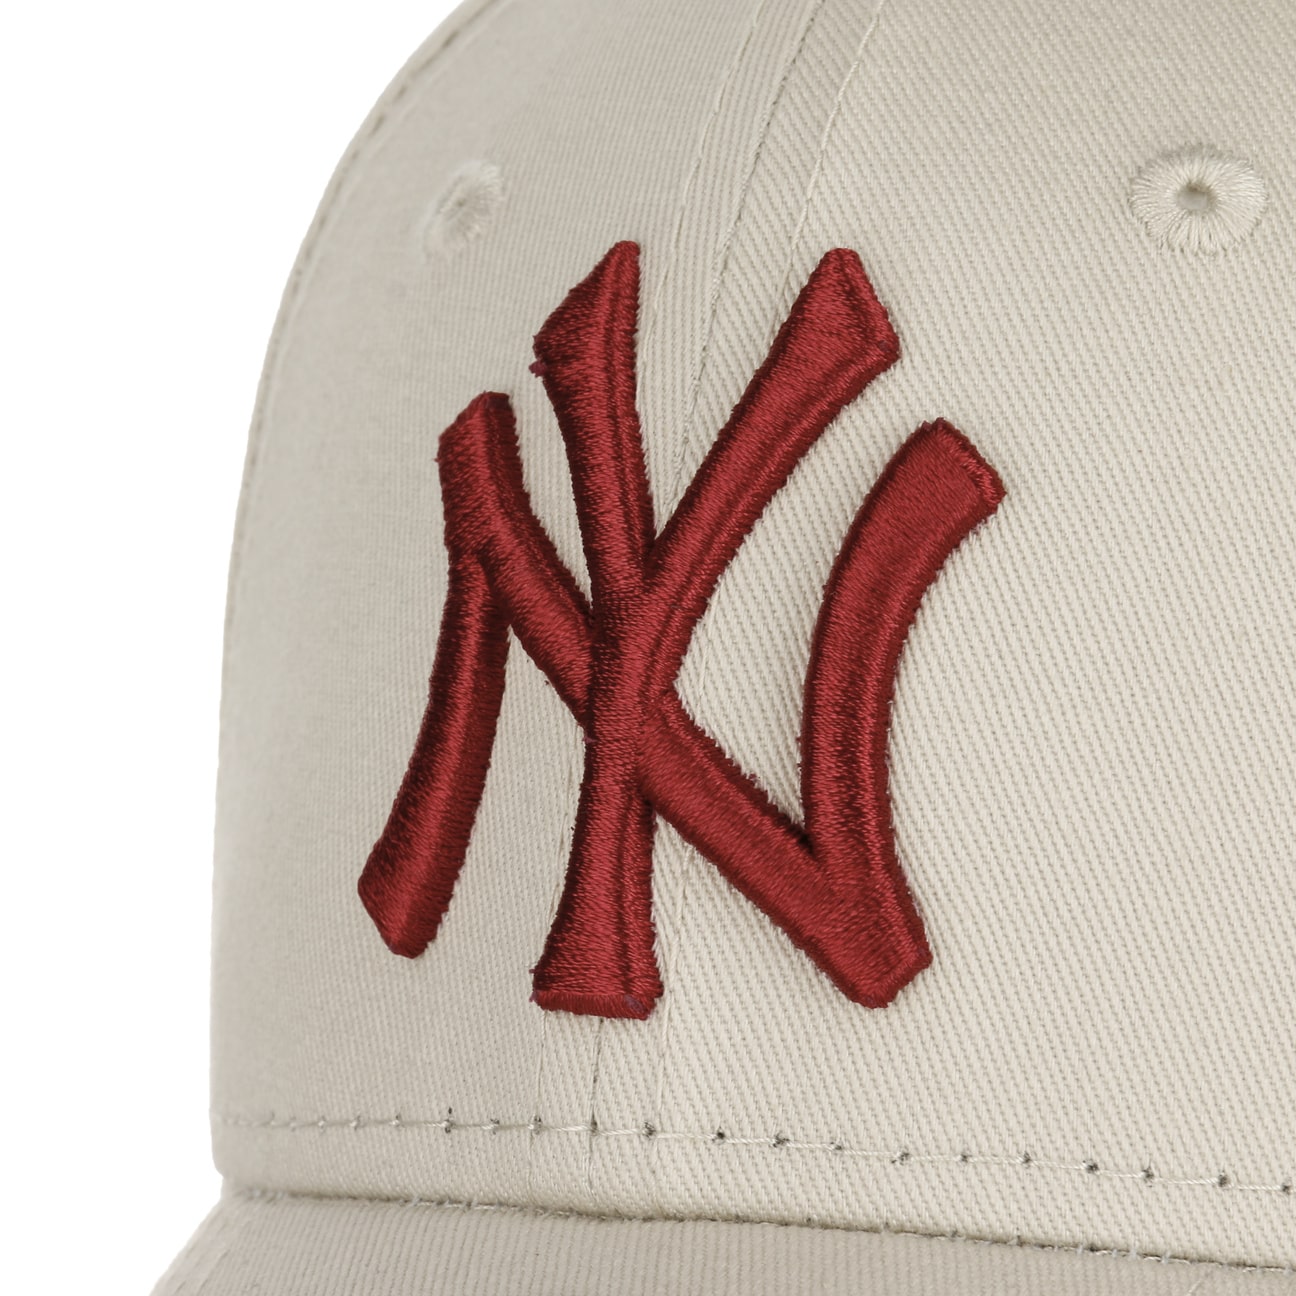 Starry New York Yankees Infant 9FORTY Cap D01_157